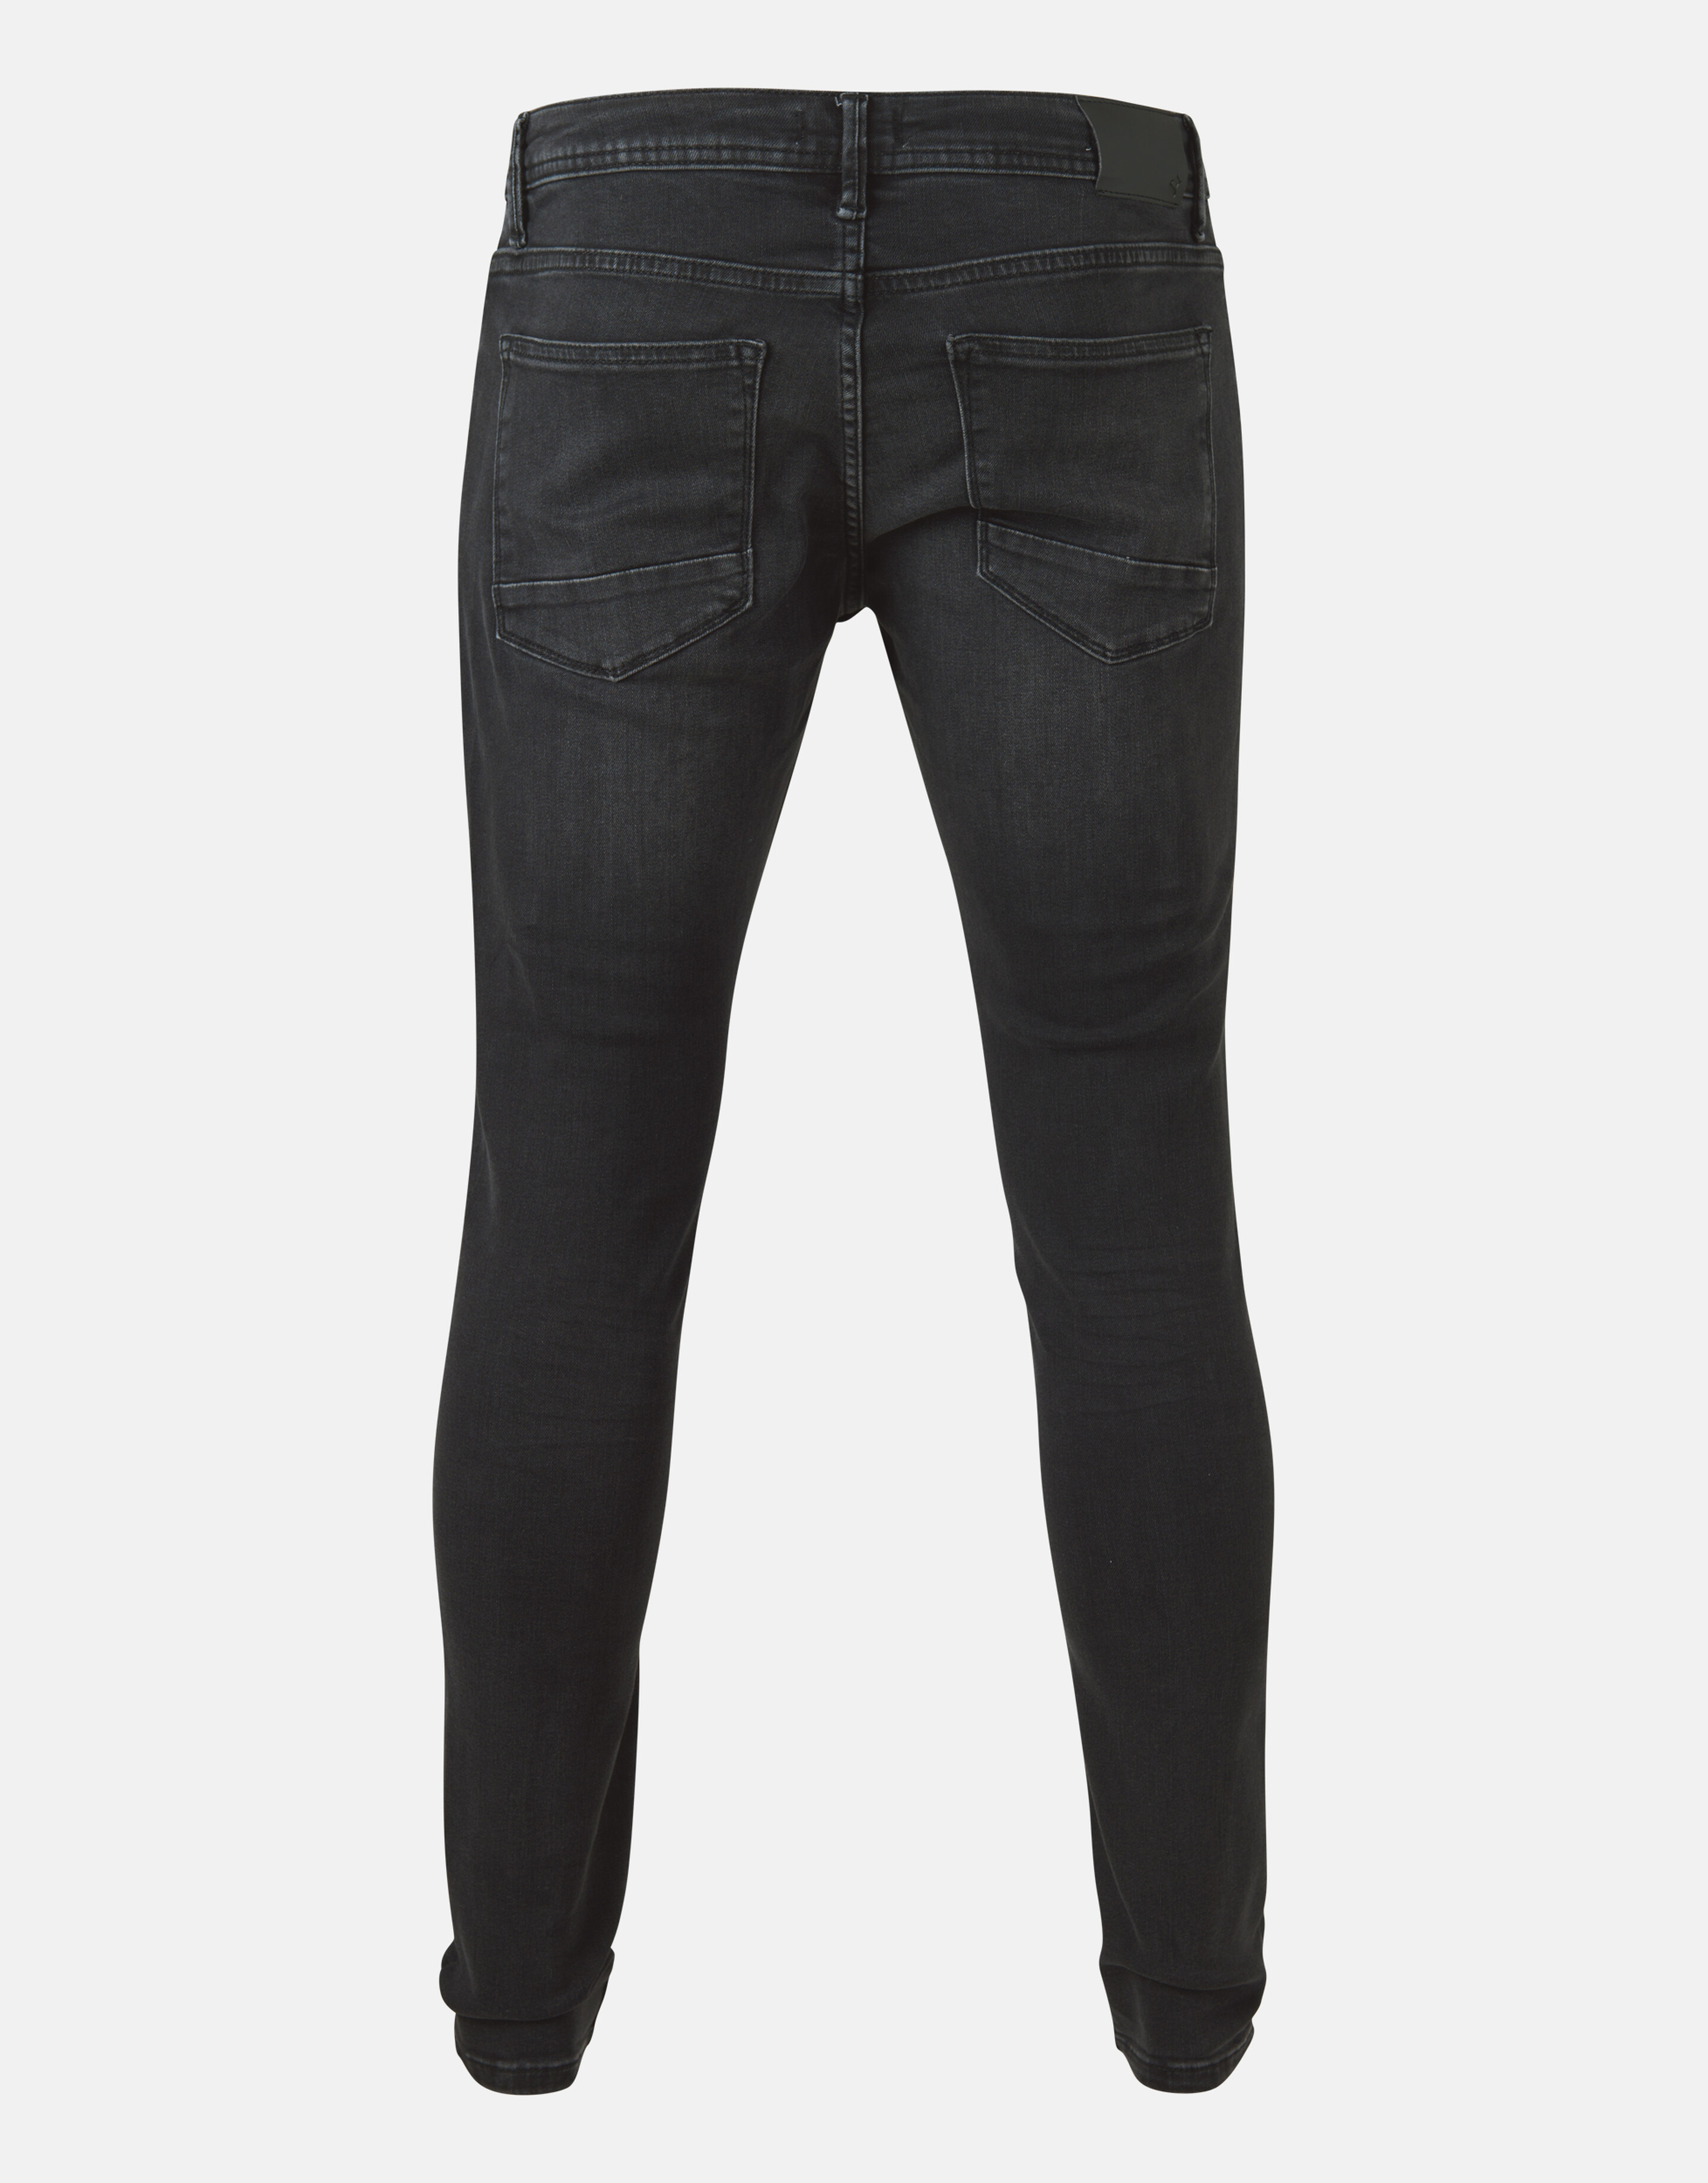 Skinny Fit Jeans Zwart Washed L34 Refill